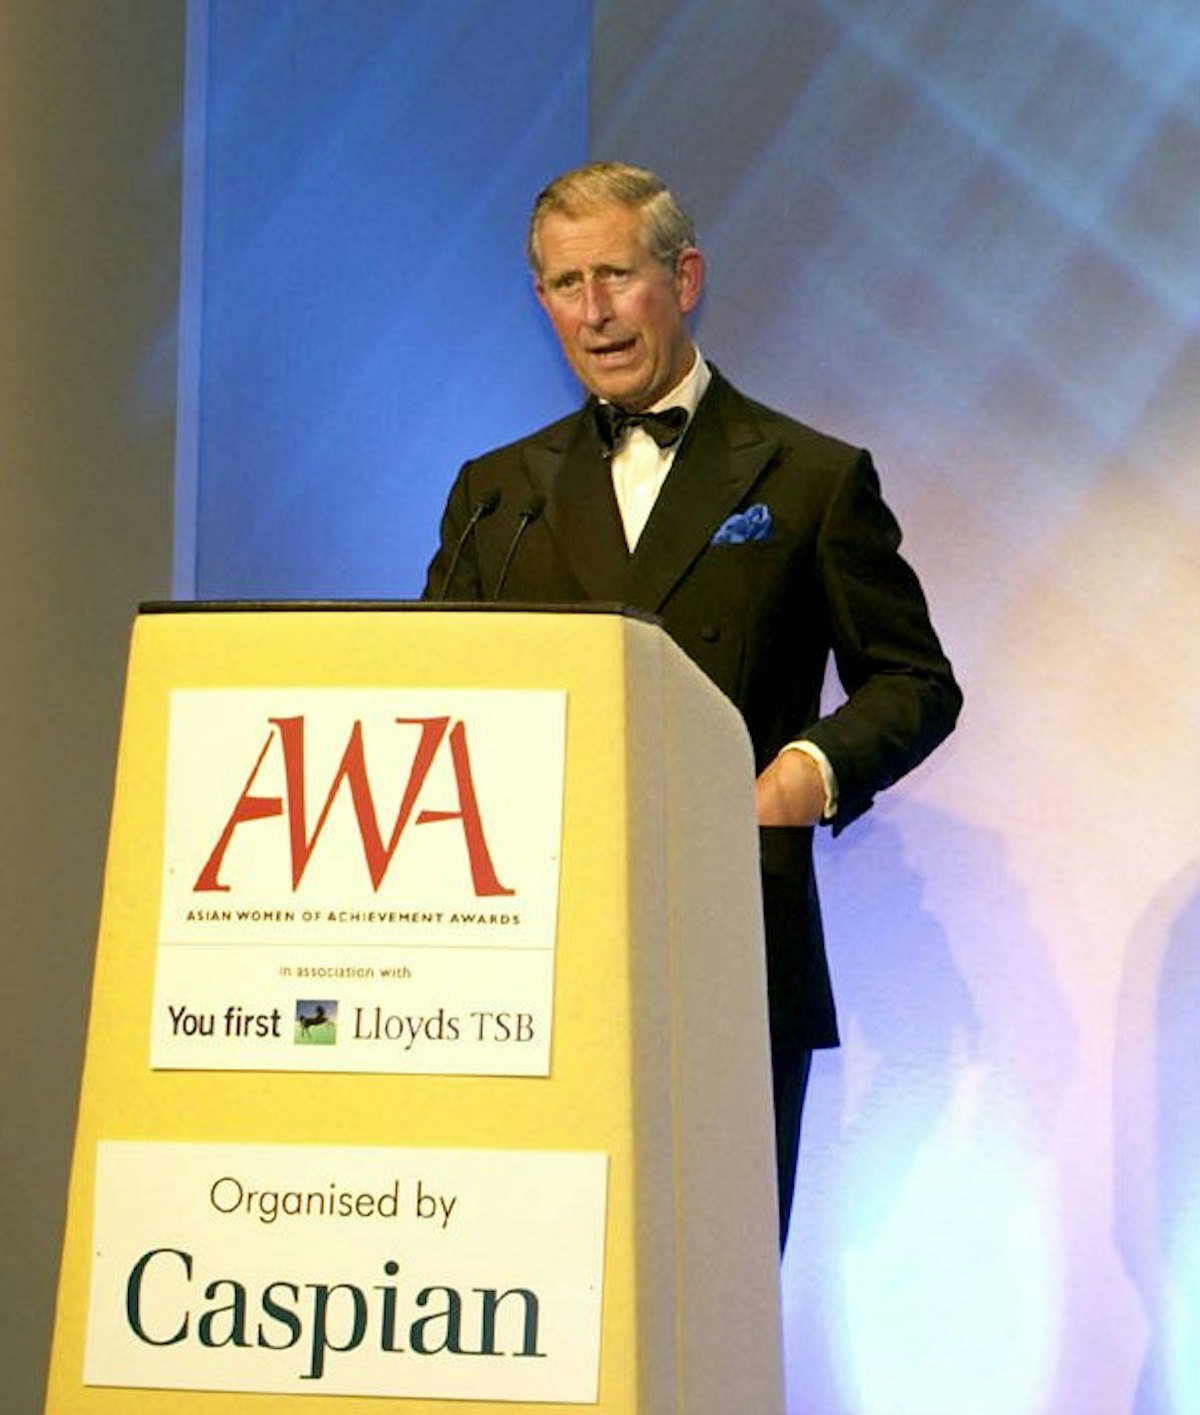 The Prince of Wales, Prince Charles, addressing the Asian Women of Achievement Awards ceremony, 2005. Photo courtesy of Asian Women of Achievement Awards.